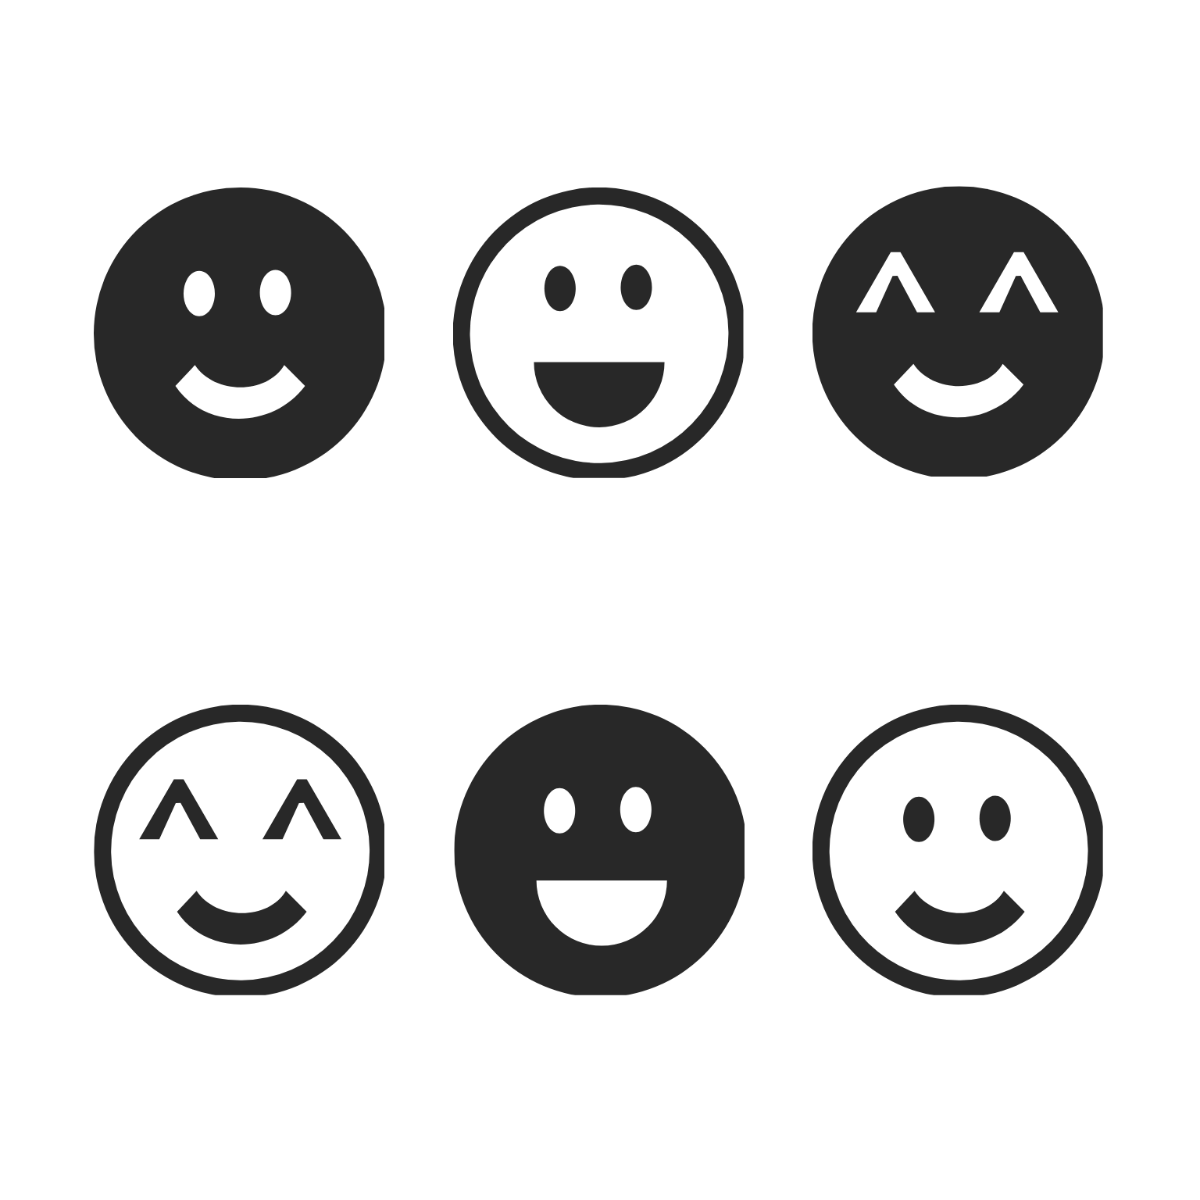 Black and White Smiley Face Vector Template